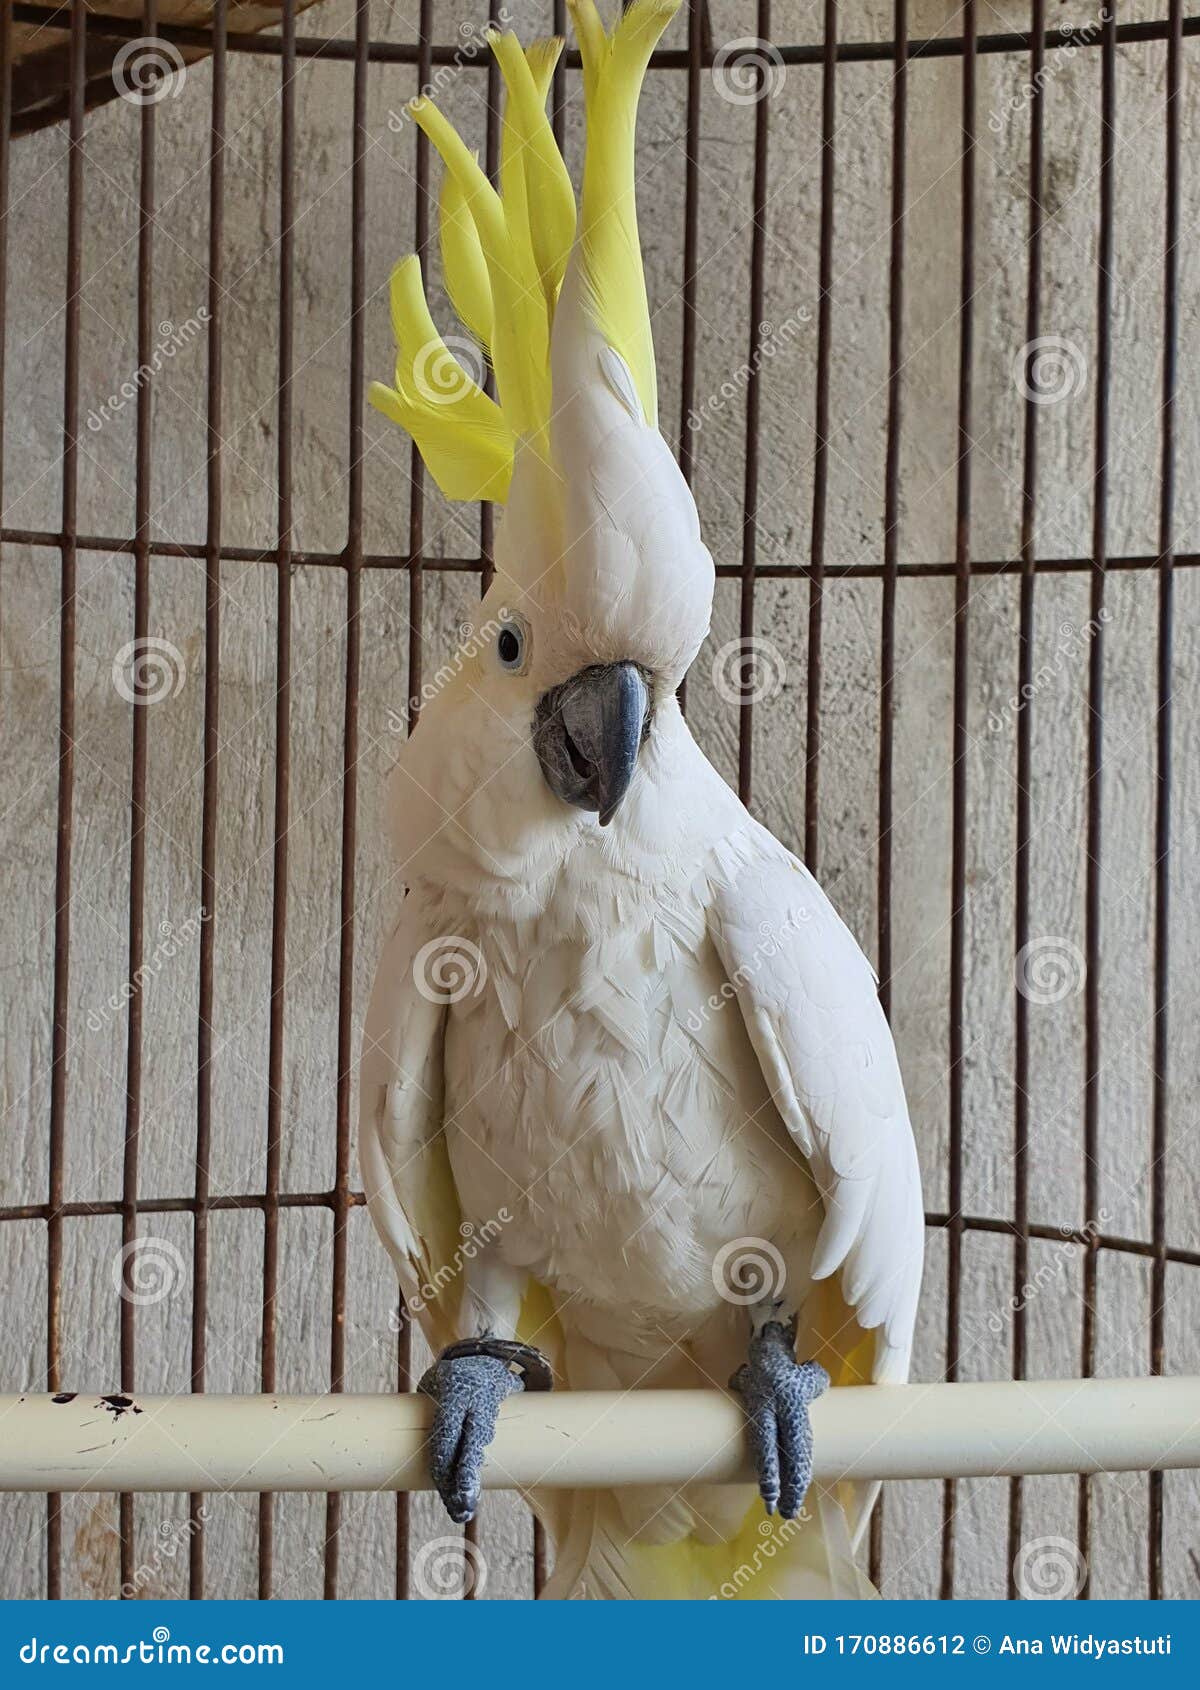 A Funny and Talking Parrot in the Cage Stock Photo - Image of parrot,  talking: 170886612